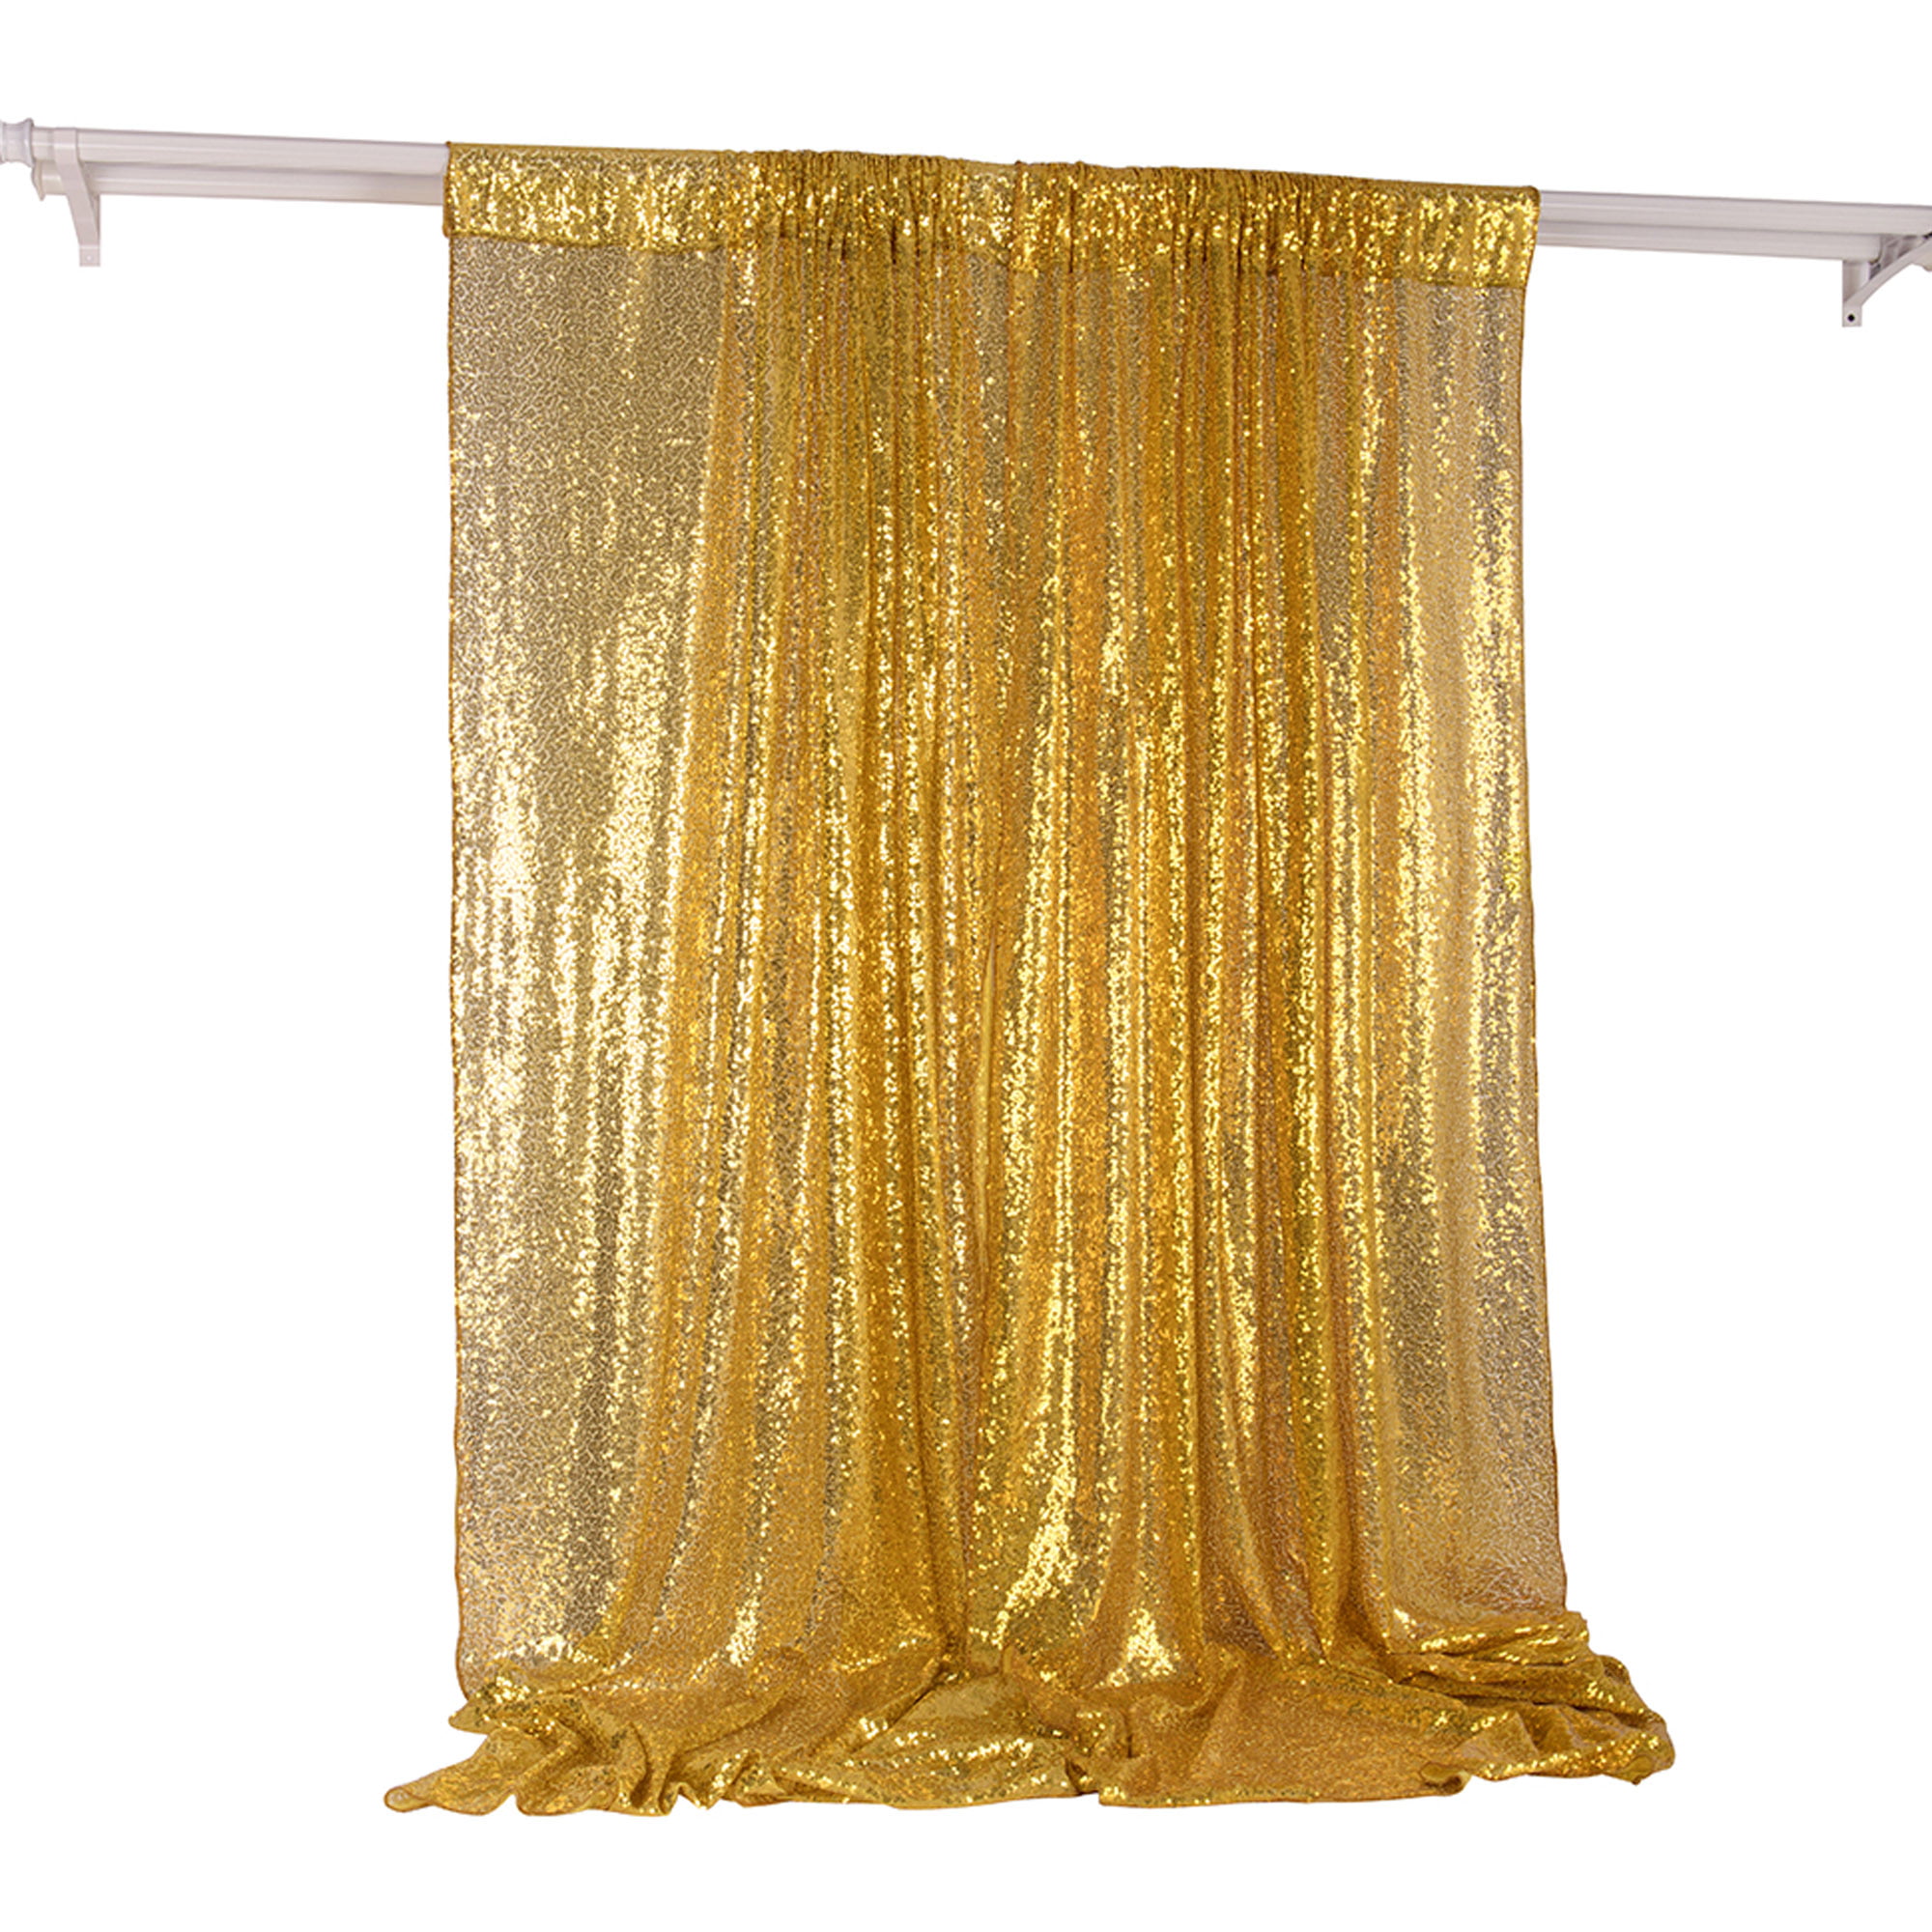 4FTX7FT Wedding Sequin Backdrop Sparkly Background Party Sequin Curtain Backdrop Zdada Gold Photo Sequin Backdrop